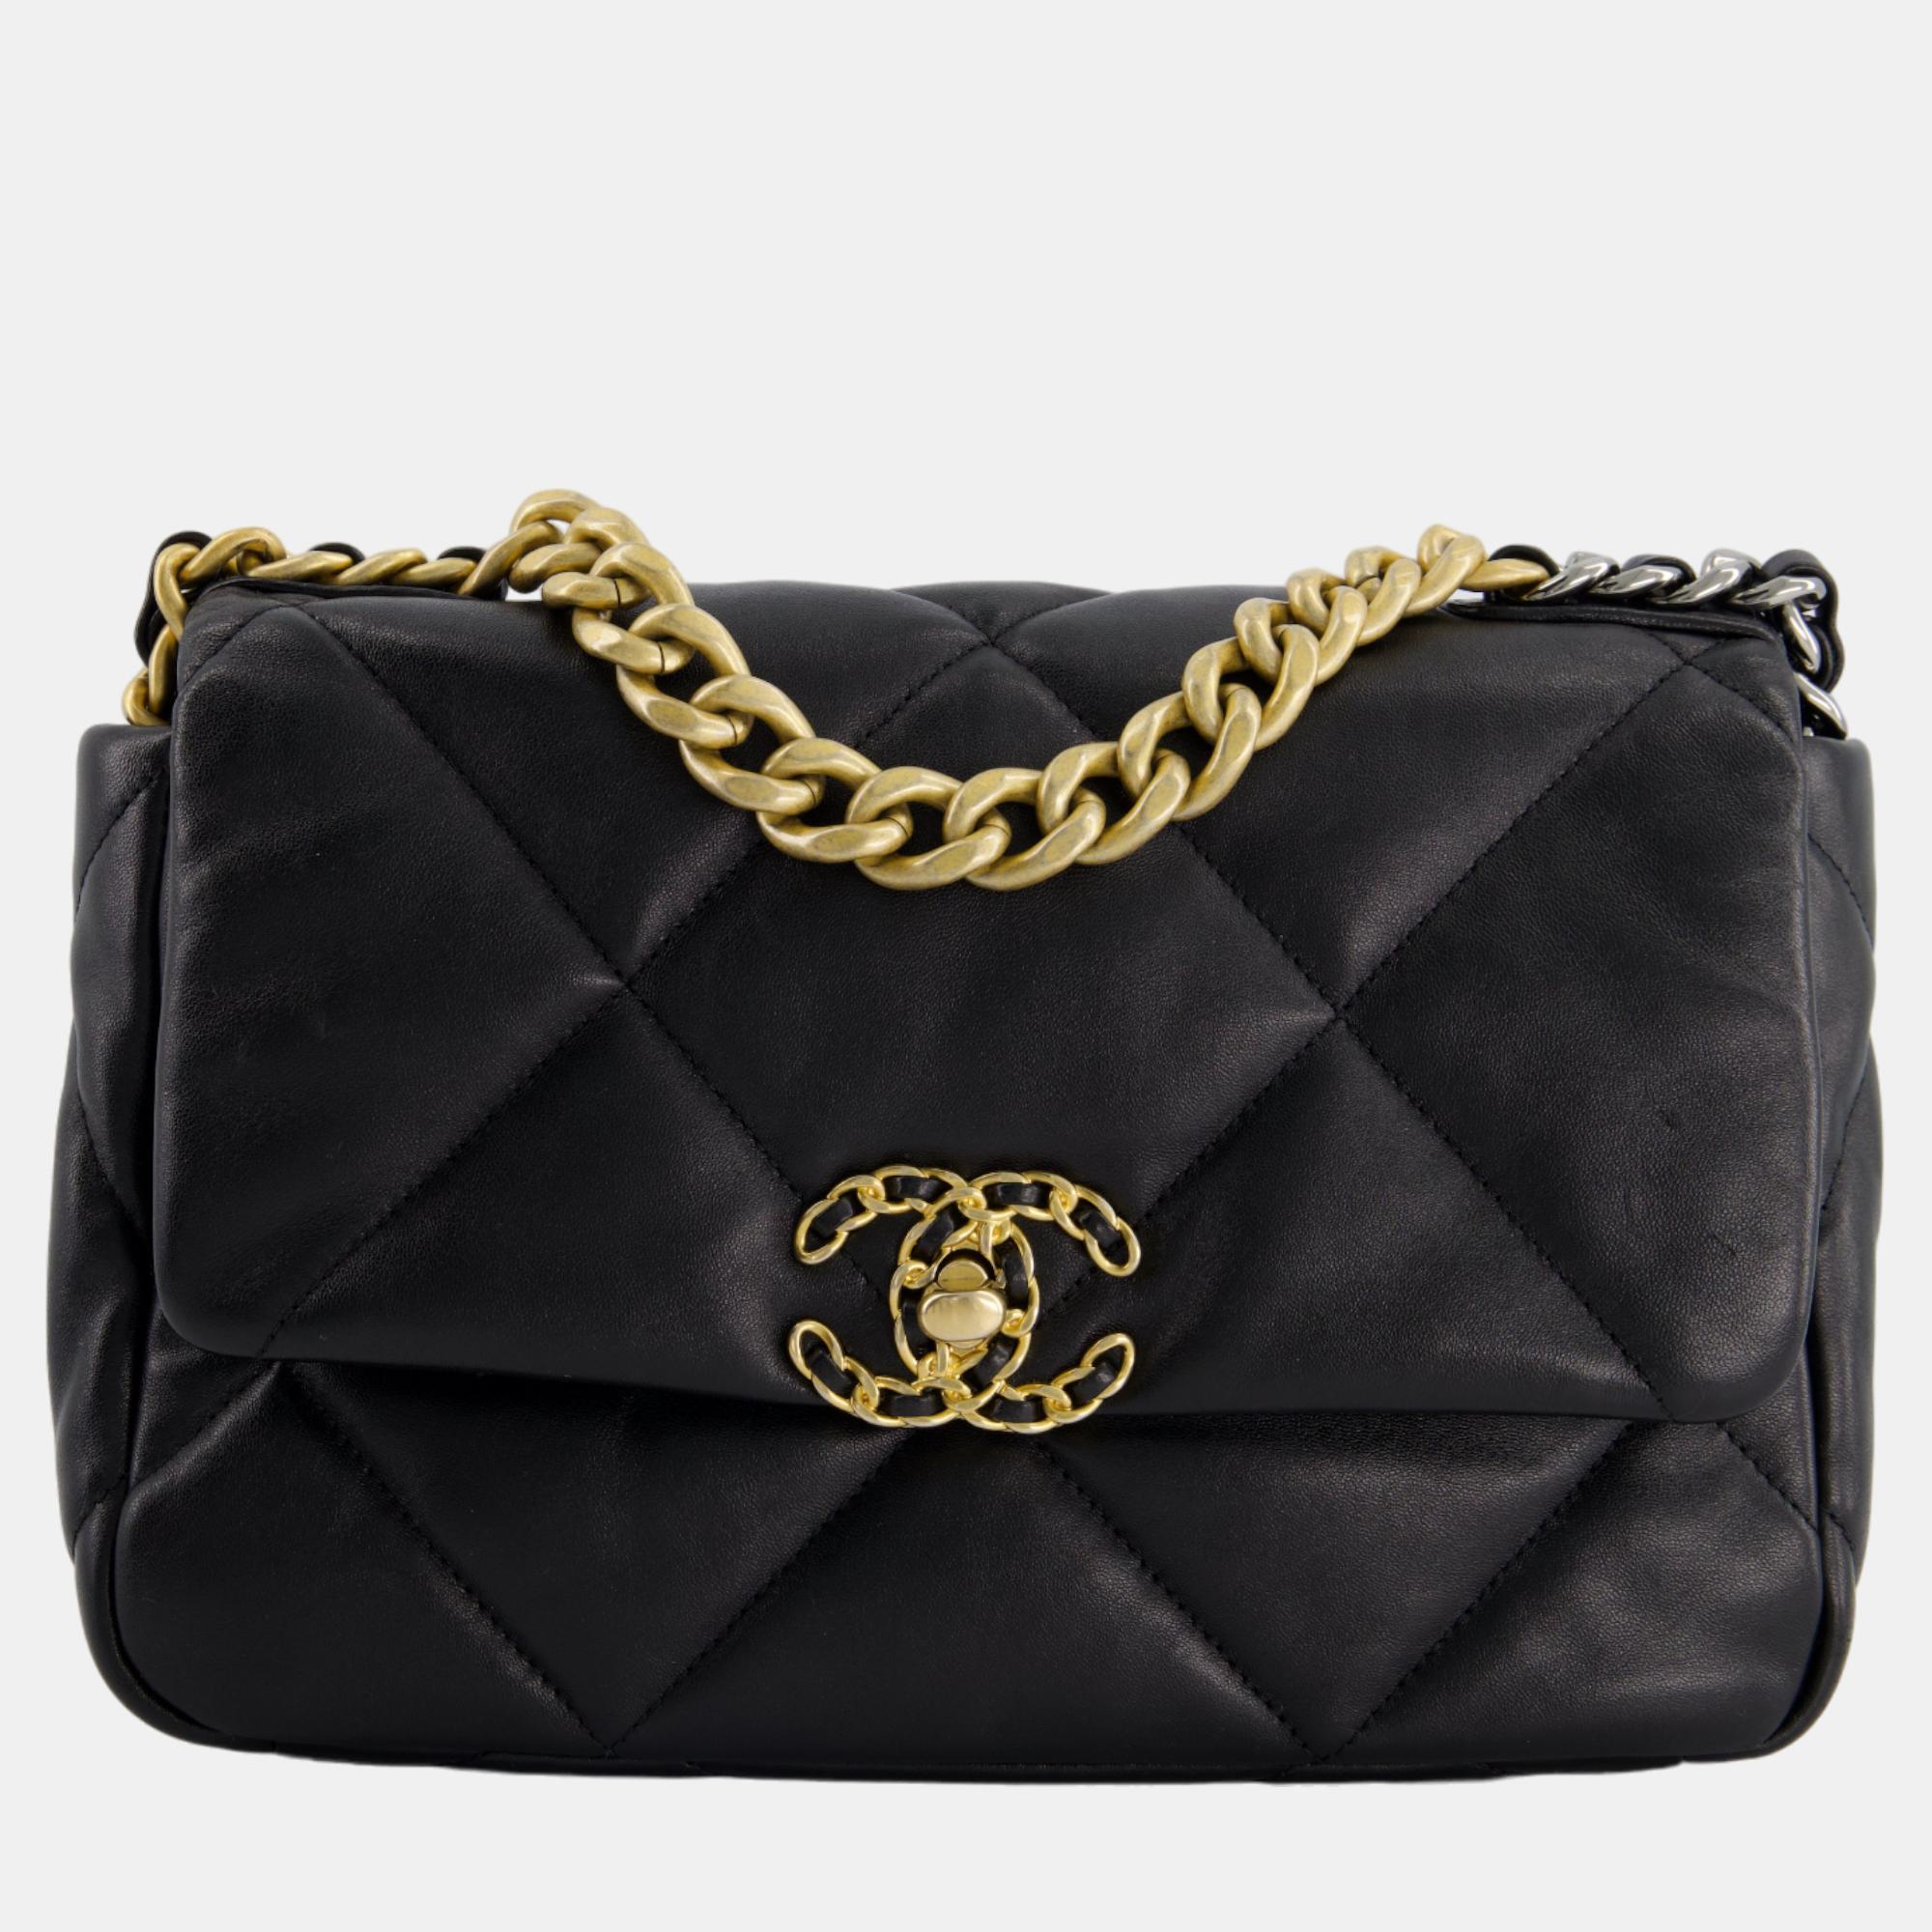 Chanel 19 Black Small Flap Bag In Goatskin Leather With Mixed Hardware